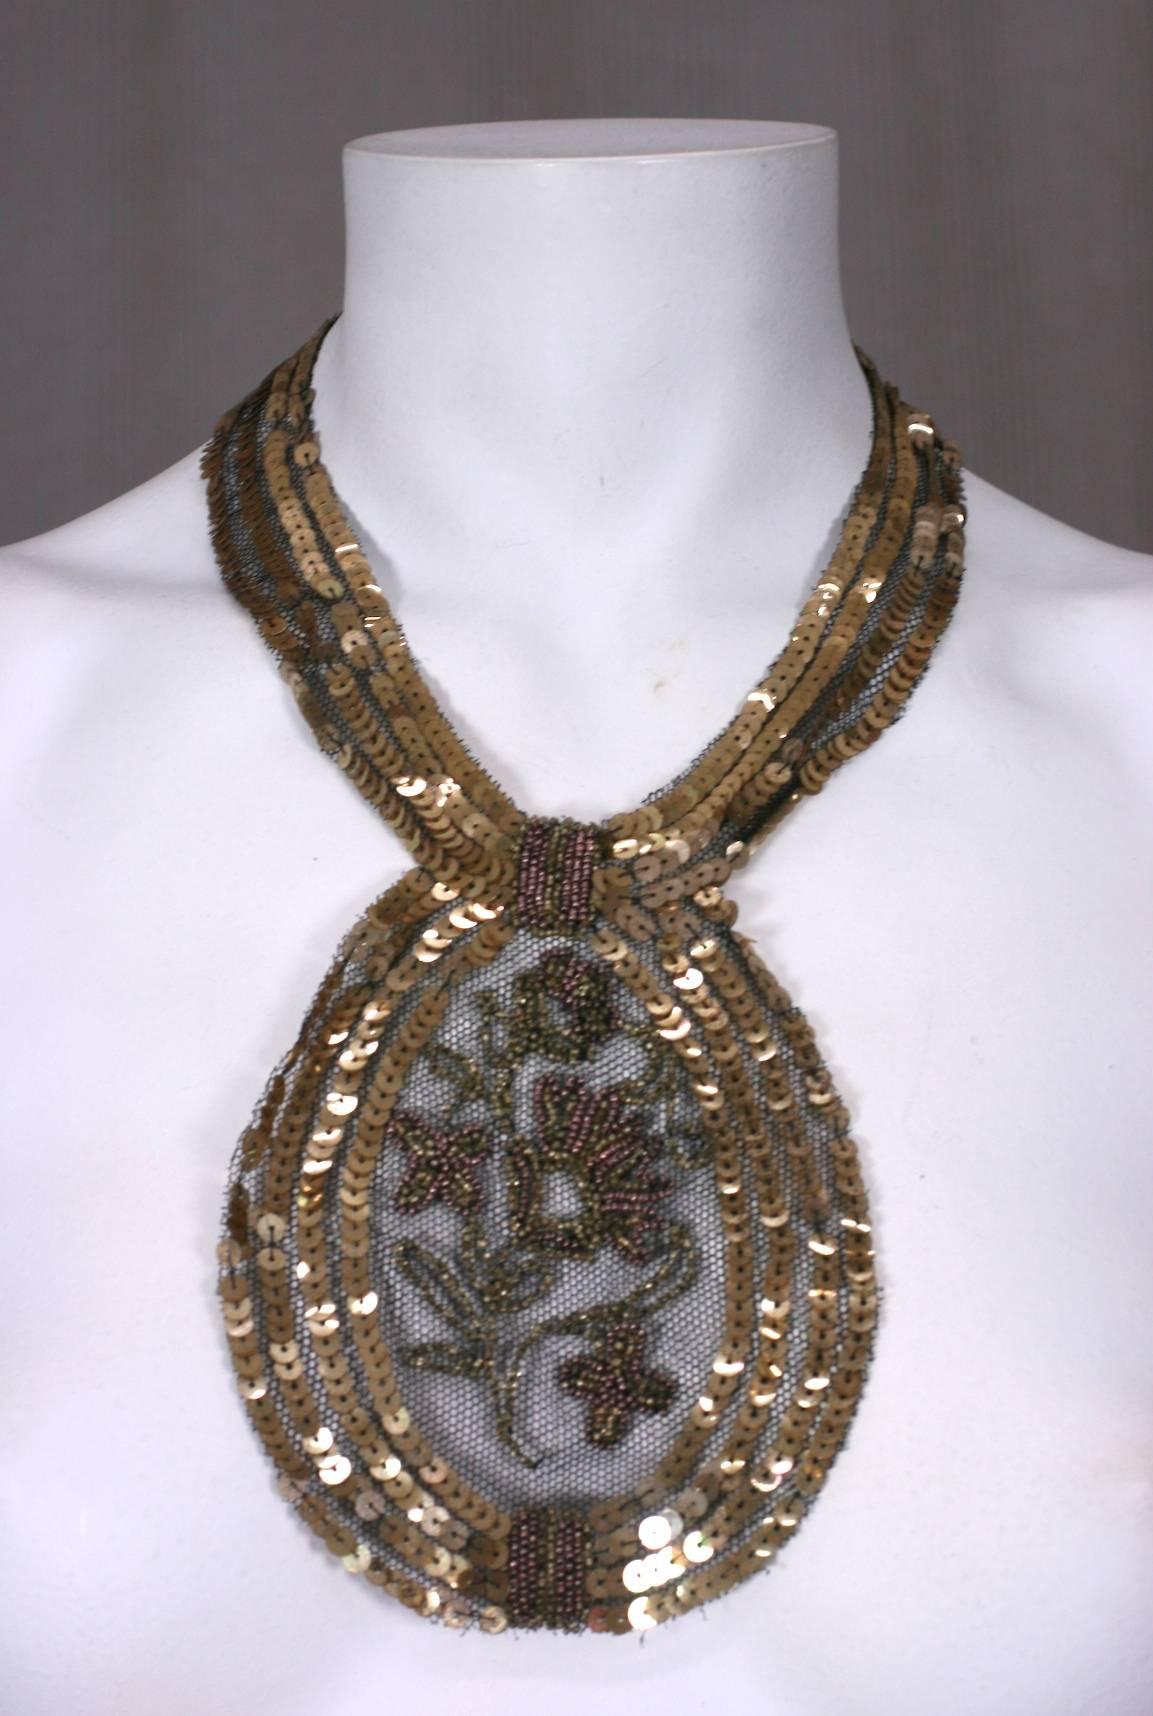 1920's Sequin and Beaded Neck Piece mostly likely born as a dress ornament but, converted to a necklace with the addition of a clasp. Hand embroidered gold sequins and beads are sewn on a black tulle base. Delicate and striking with lovely antique